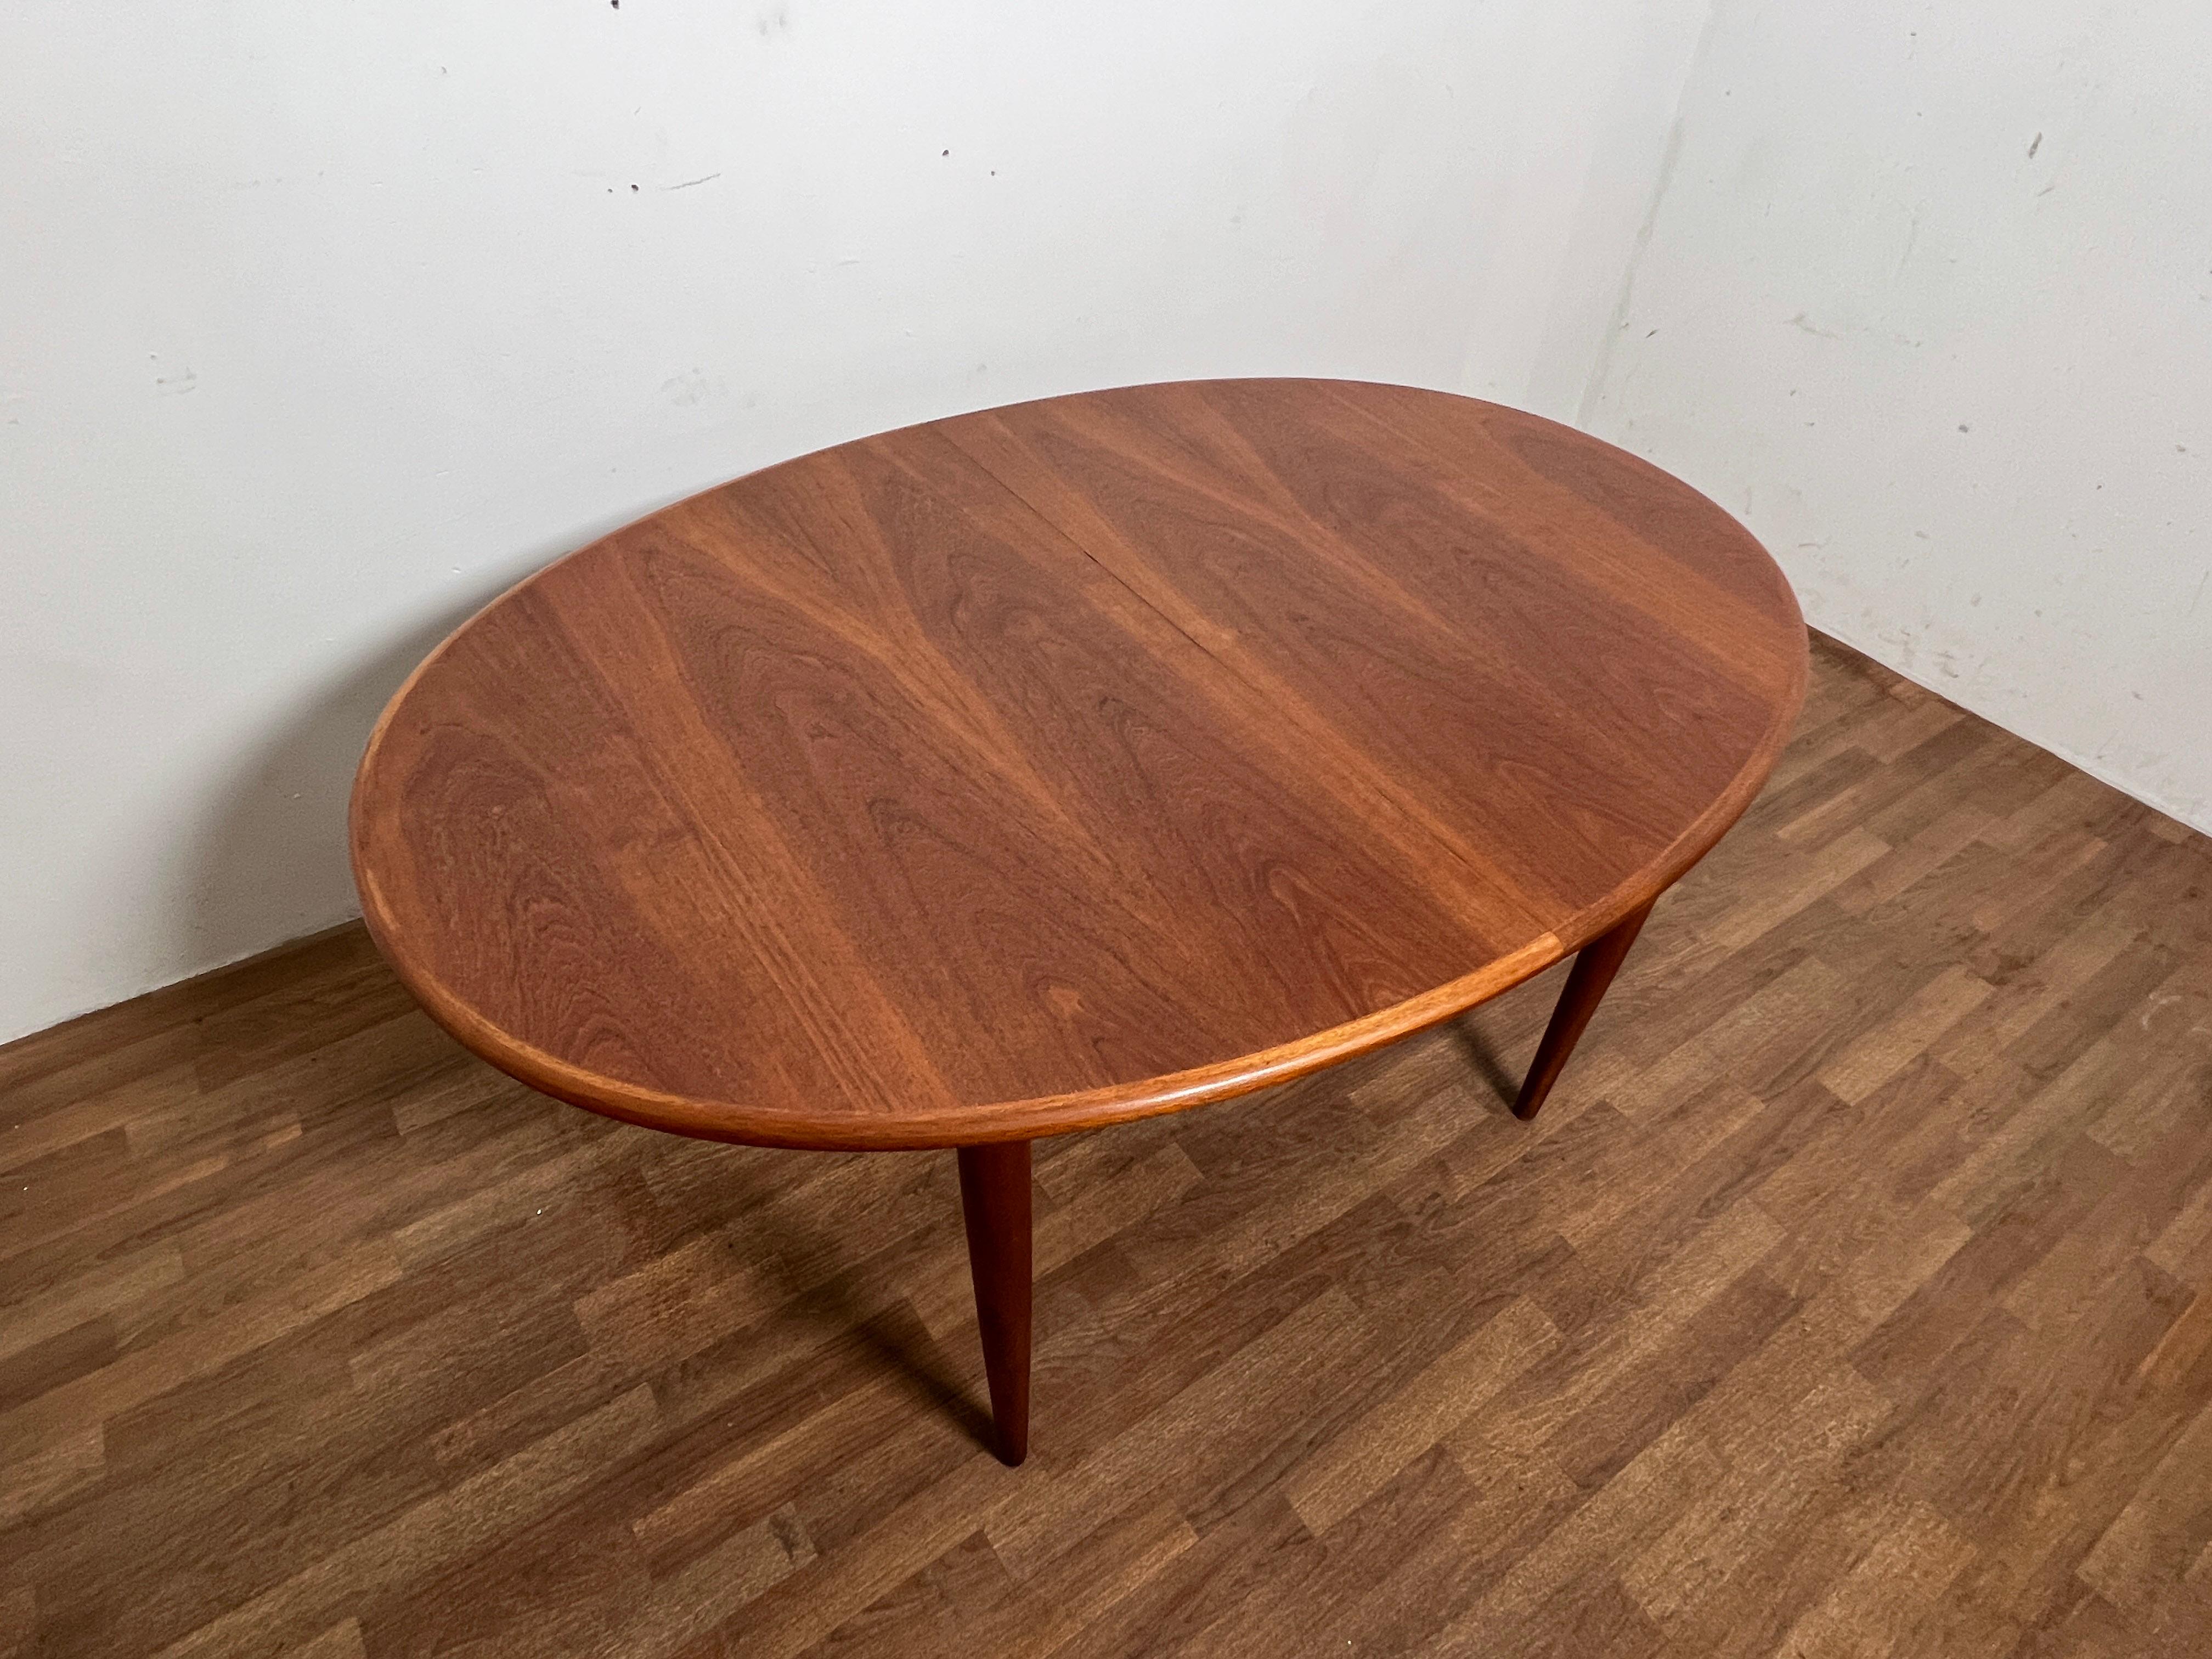 Scandinavian Modern Danish Teak Oval Dining Table With Two Leaves by Gudme, Circa 1960s For Sale